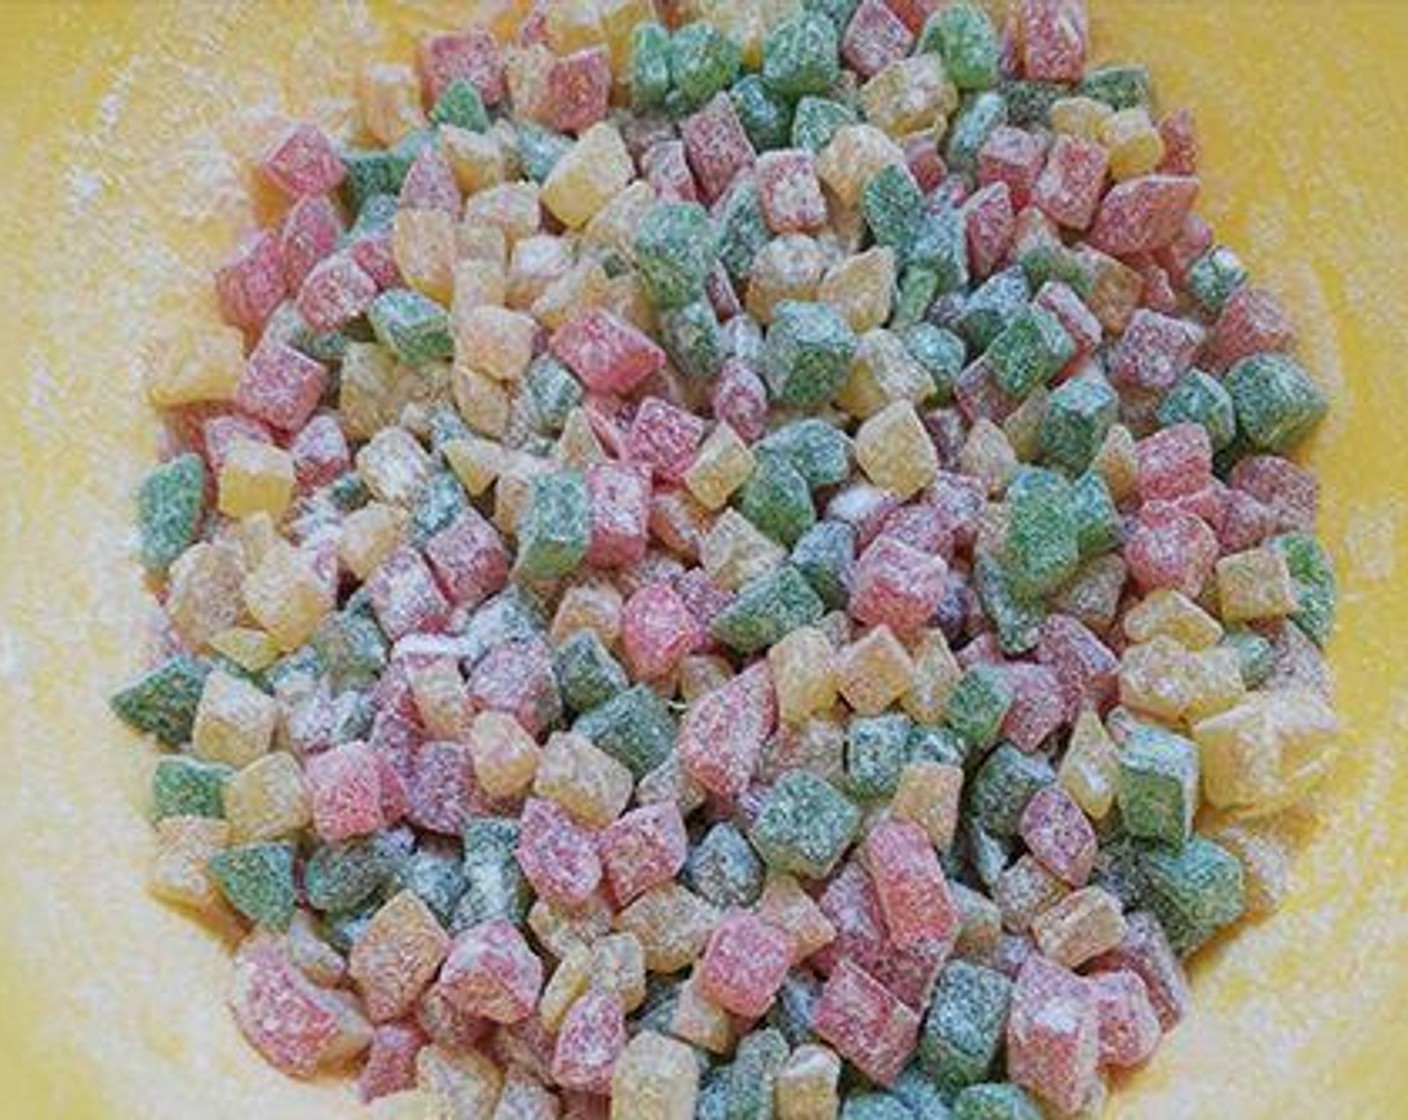 step 1 Add Tutti Frutti Candy (1 cup) to a bowl. Reserve a few to sprinkle on top before baking. Add All-Purpose Flour (1/4 cup). Mix well and set aside.